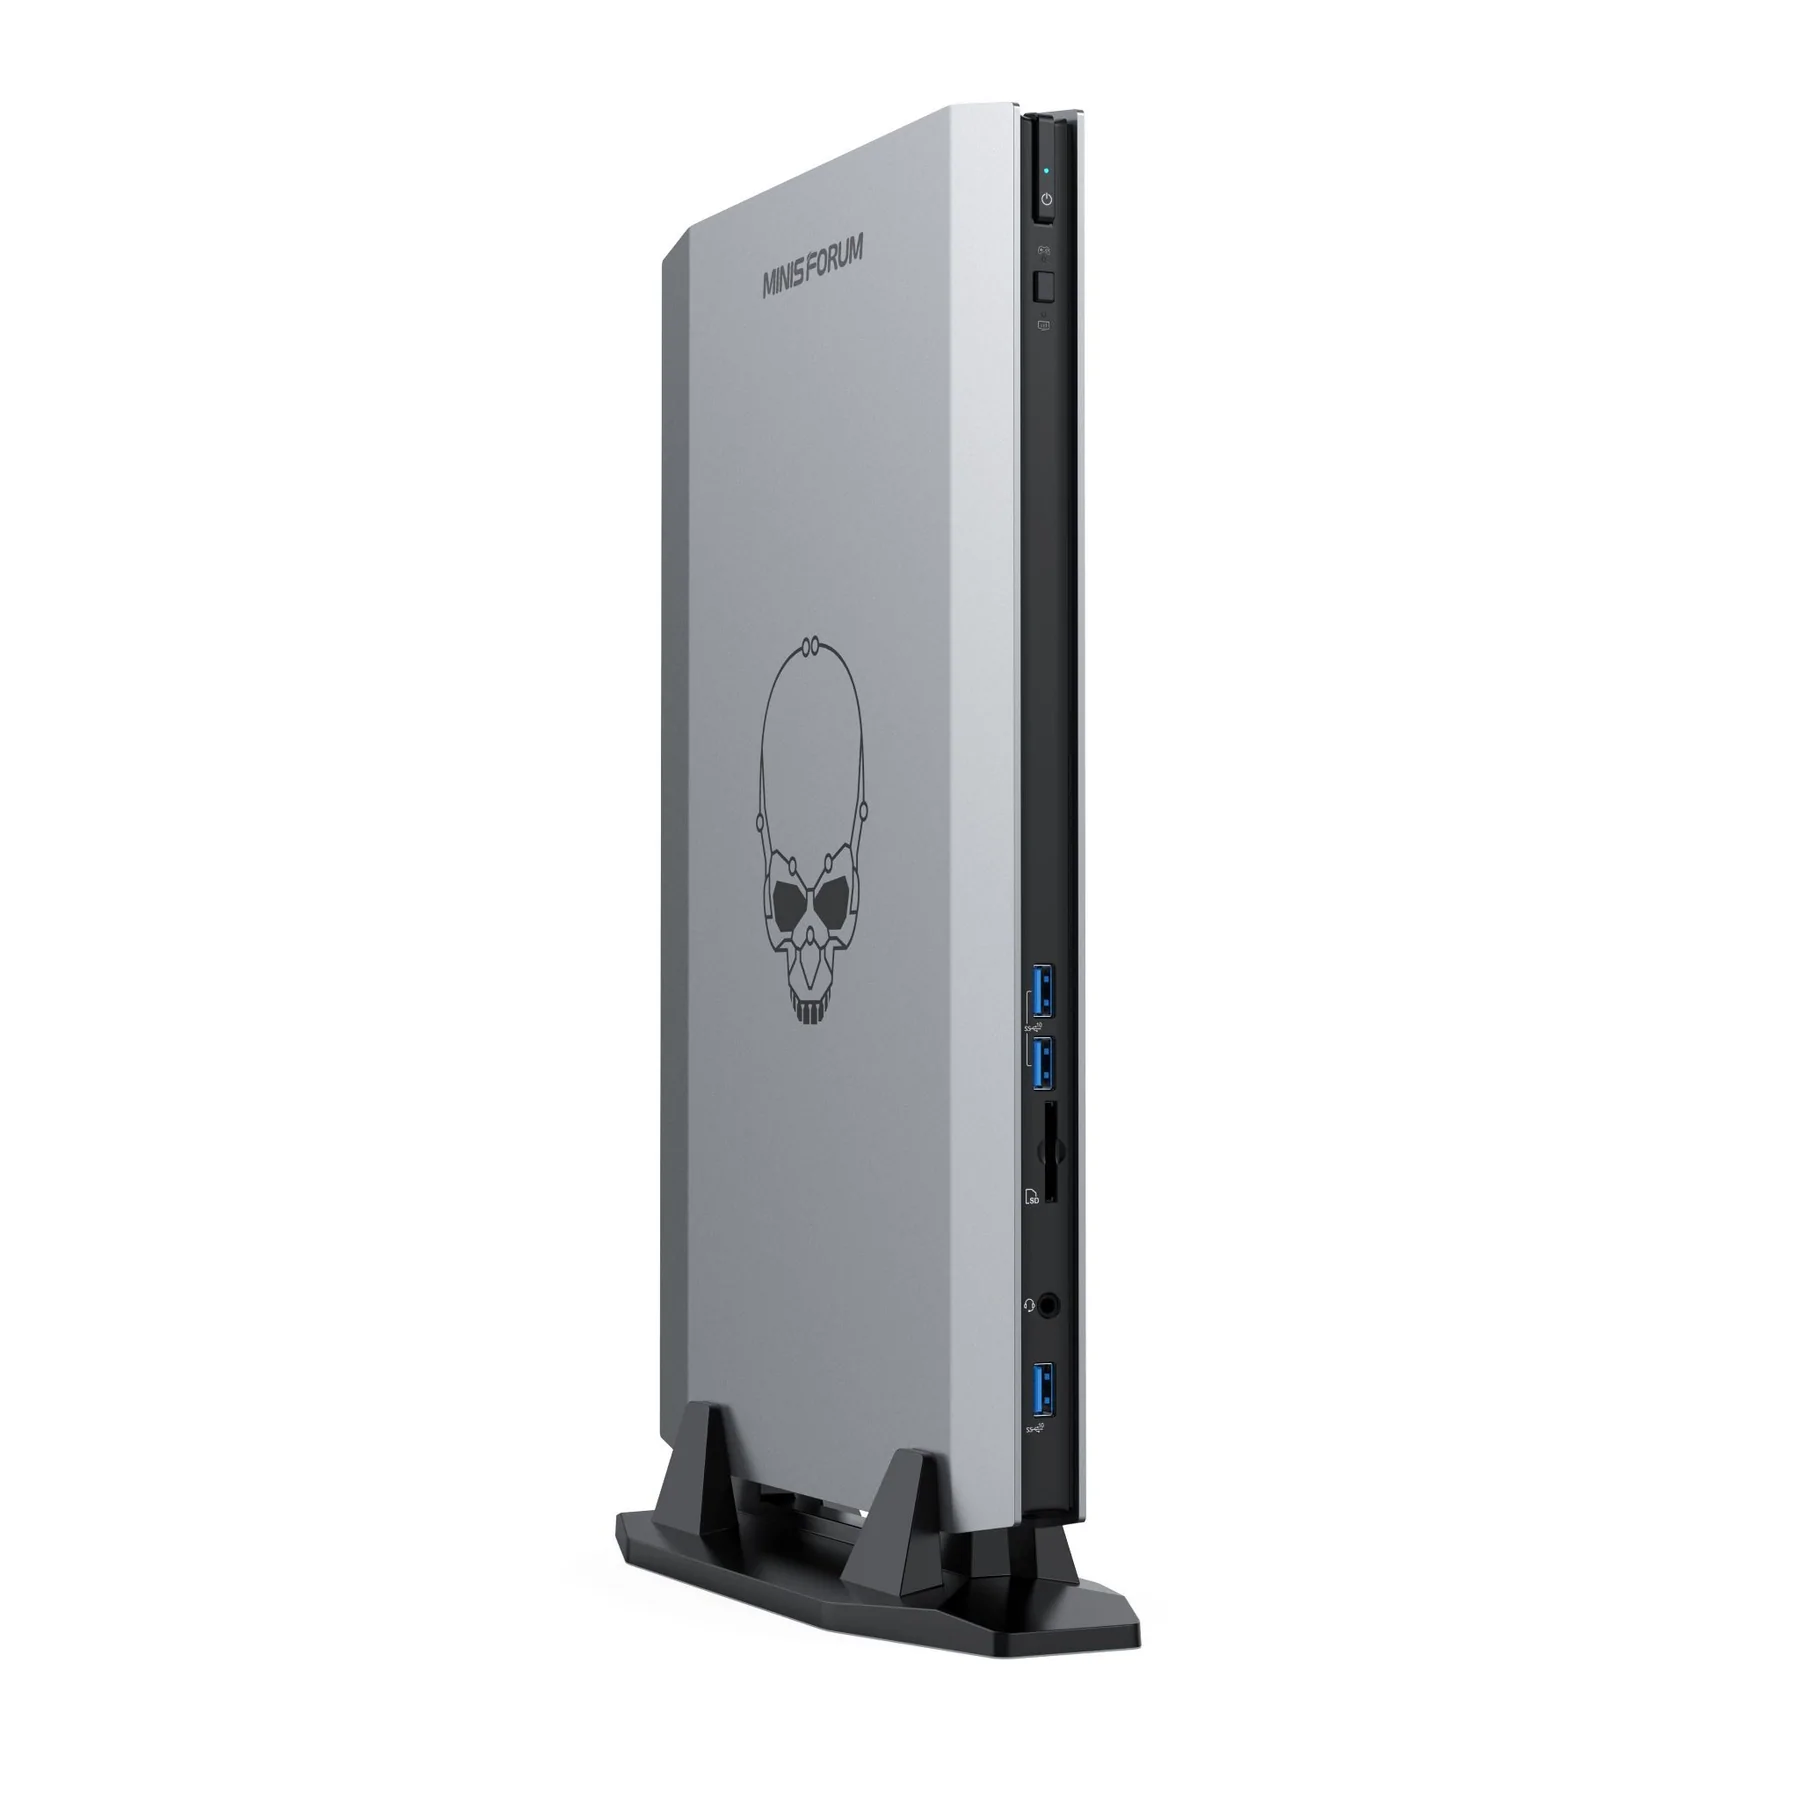 Minisforum NUCXi7 desktop PC review: Ultra slim gaming PC with GeForce RTX  3070 and Core i7-11800H -  Reviews